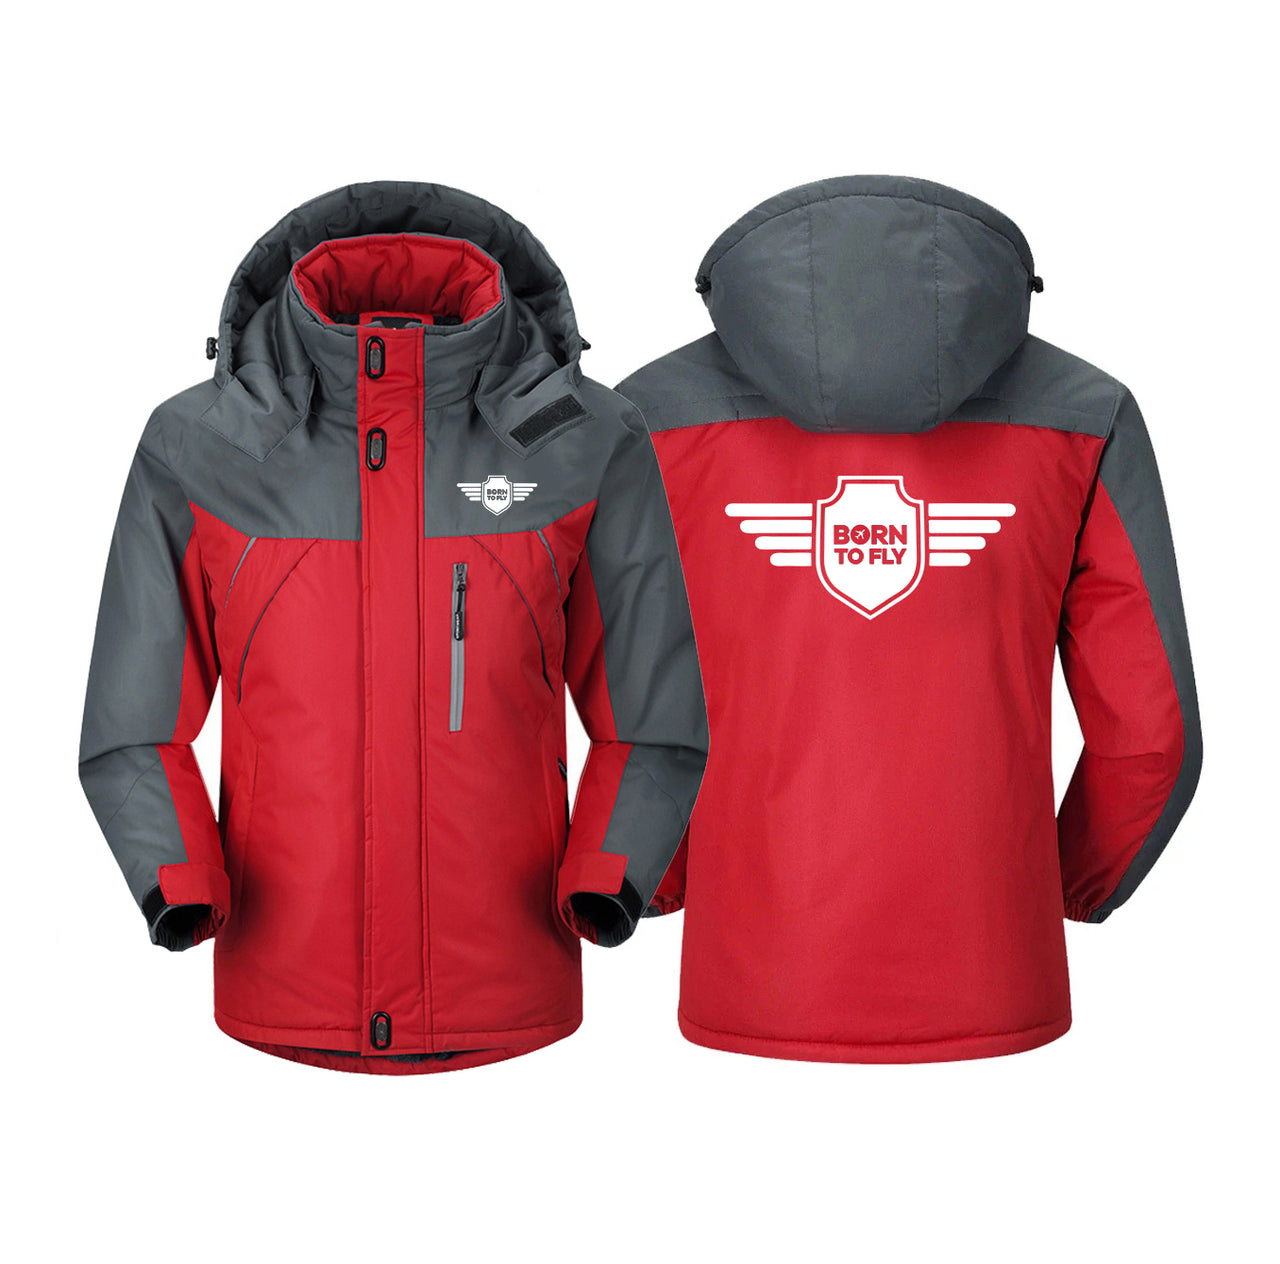 Born To Fly & Badge Designed Thick Winter Jackets